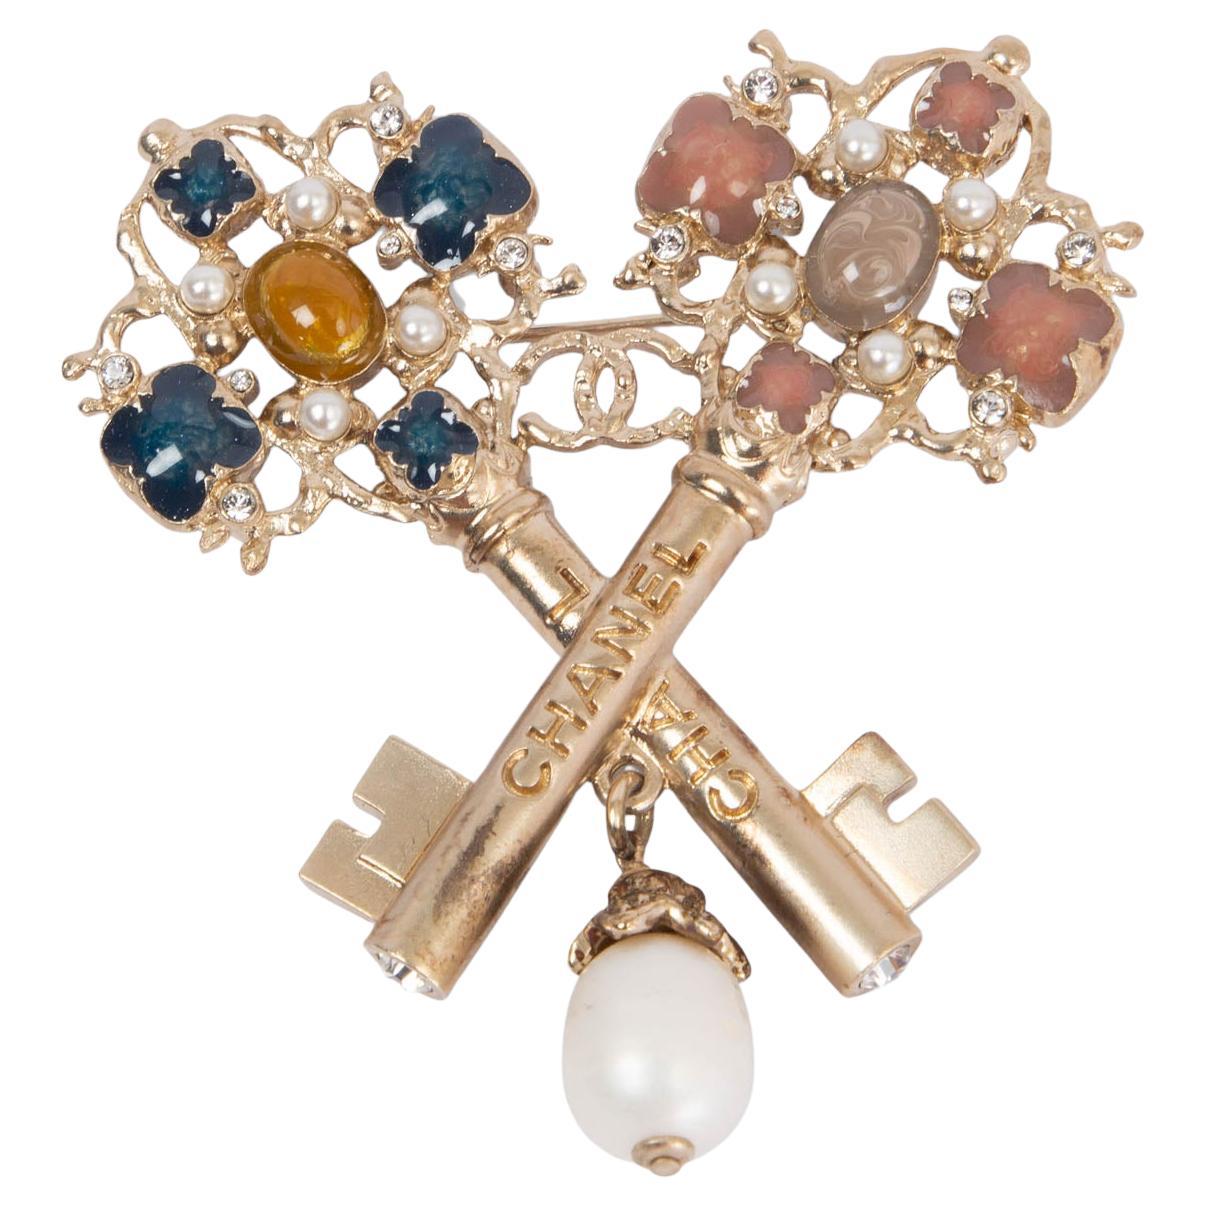 CHANEL gold-tone metal & GLASS BEADS 2017 17A COSMOPOLITE KEYS Brooch For Sale